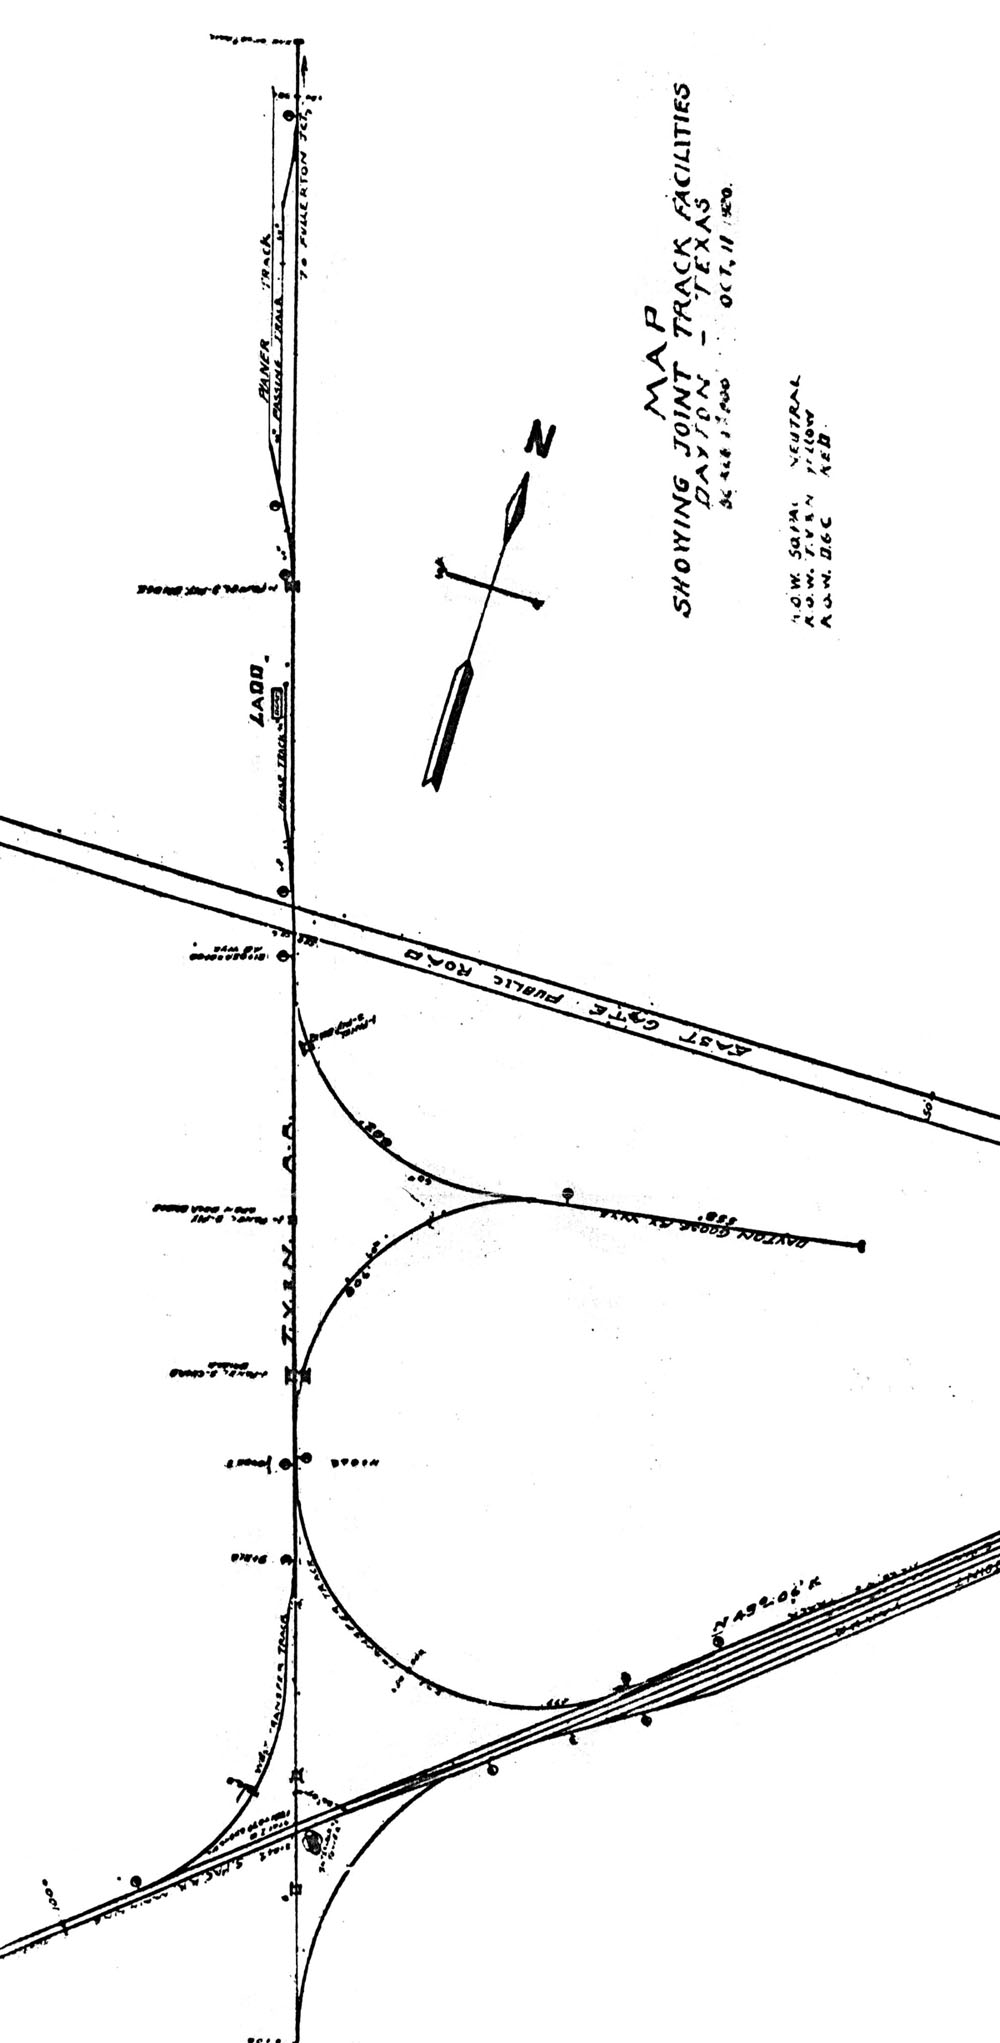 Trinity Valley and Northern Railway Company (Tex.), Map Showing Industrial Tracks at Dayton, Texas, 1920.